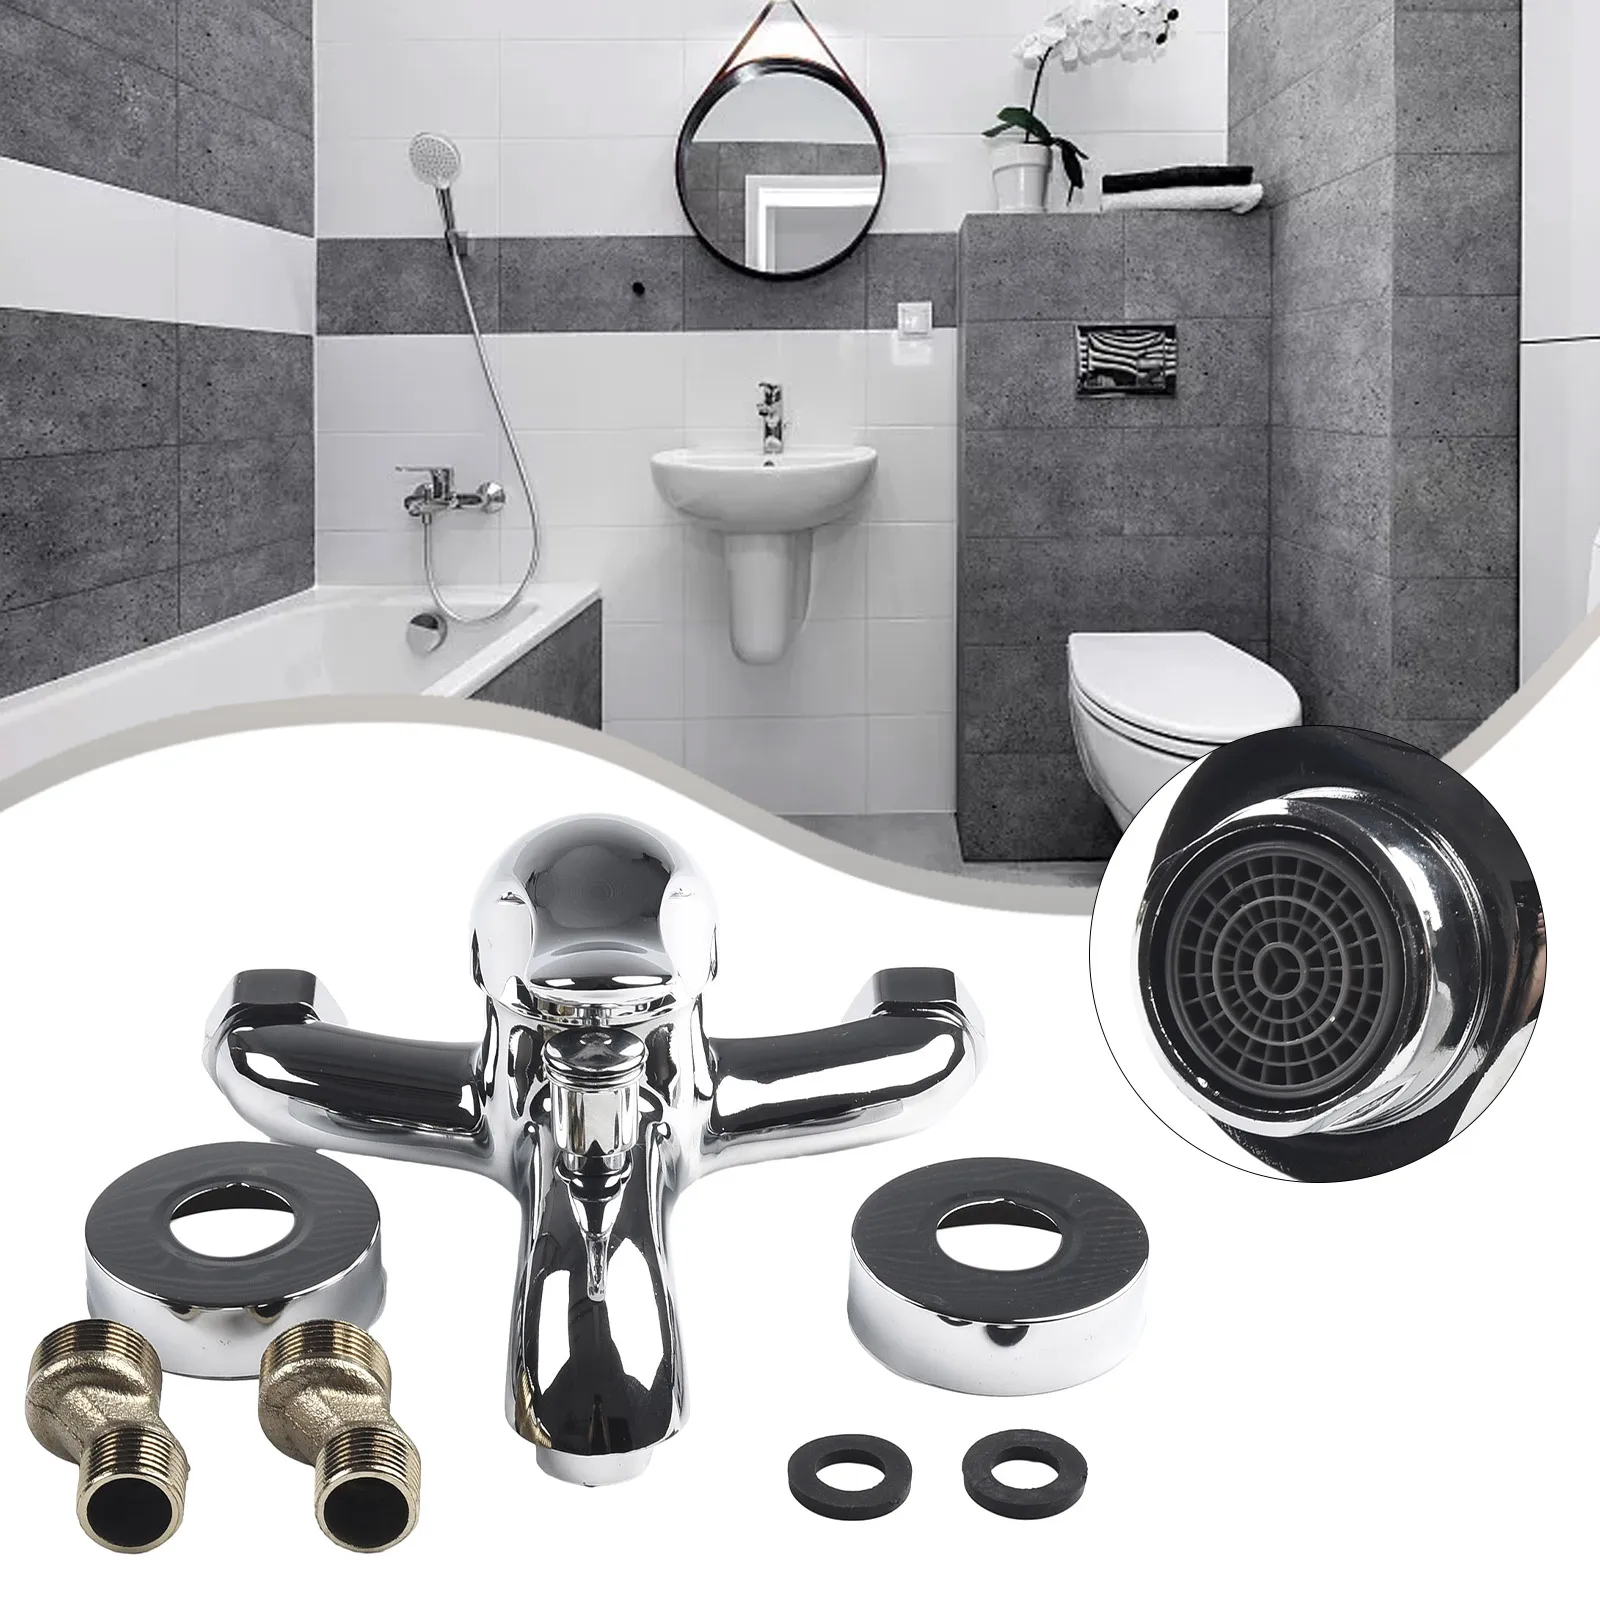 

Durable Basin Faucets Mixing Valve Kits Set Thermostats Wall Mounted Zinc Alloy Accessories Dual Spout Bathroom